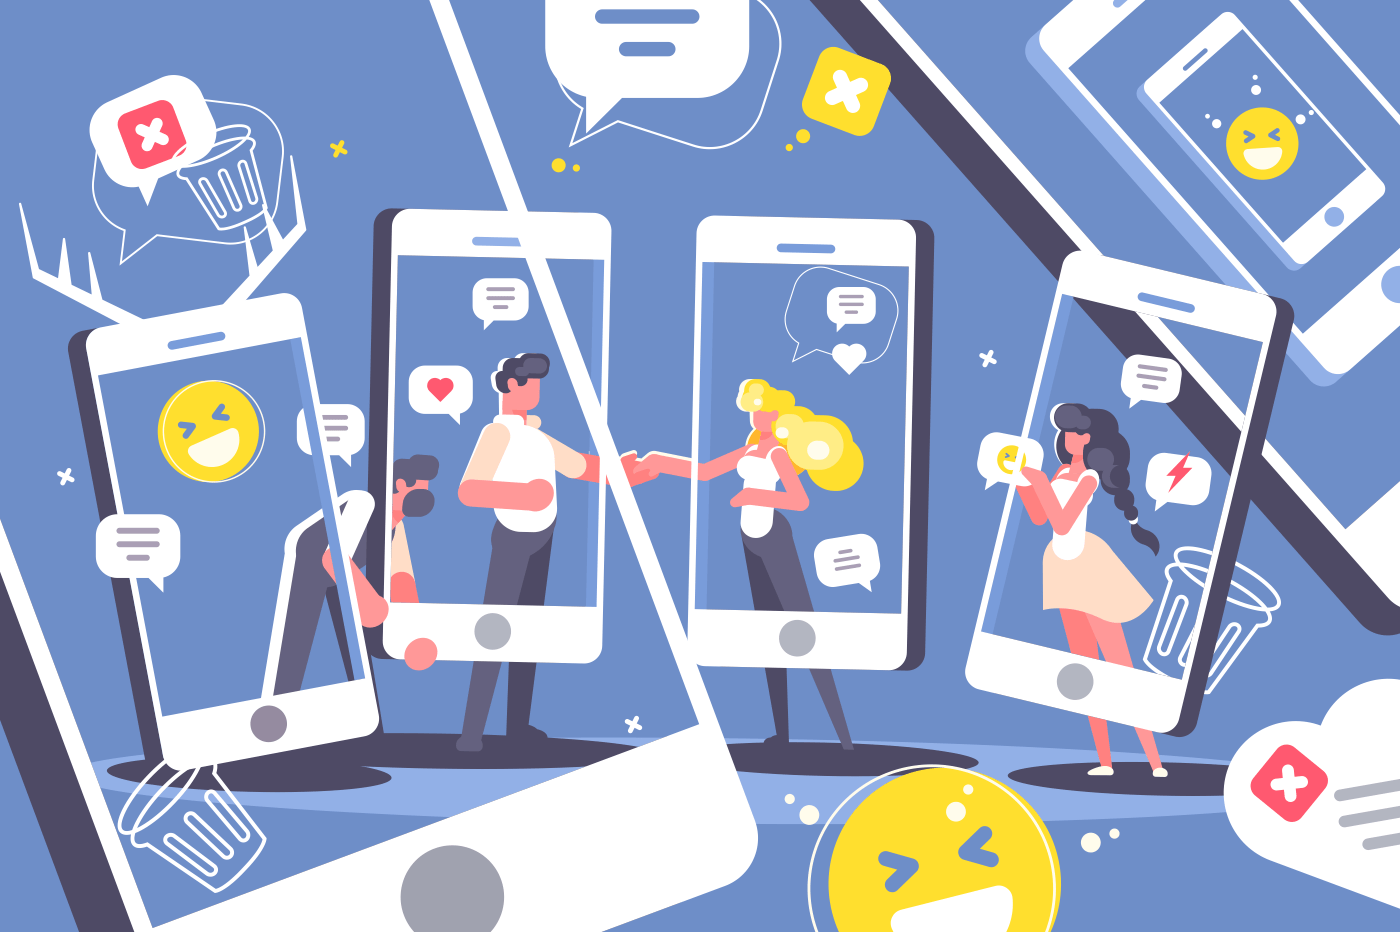 Digital mirror, life through smartphone. Communication in social networks and messengers. Vector illustration